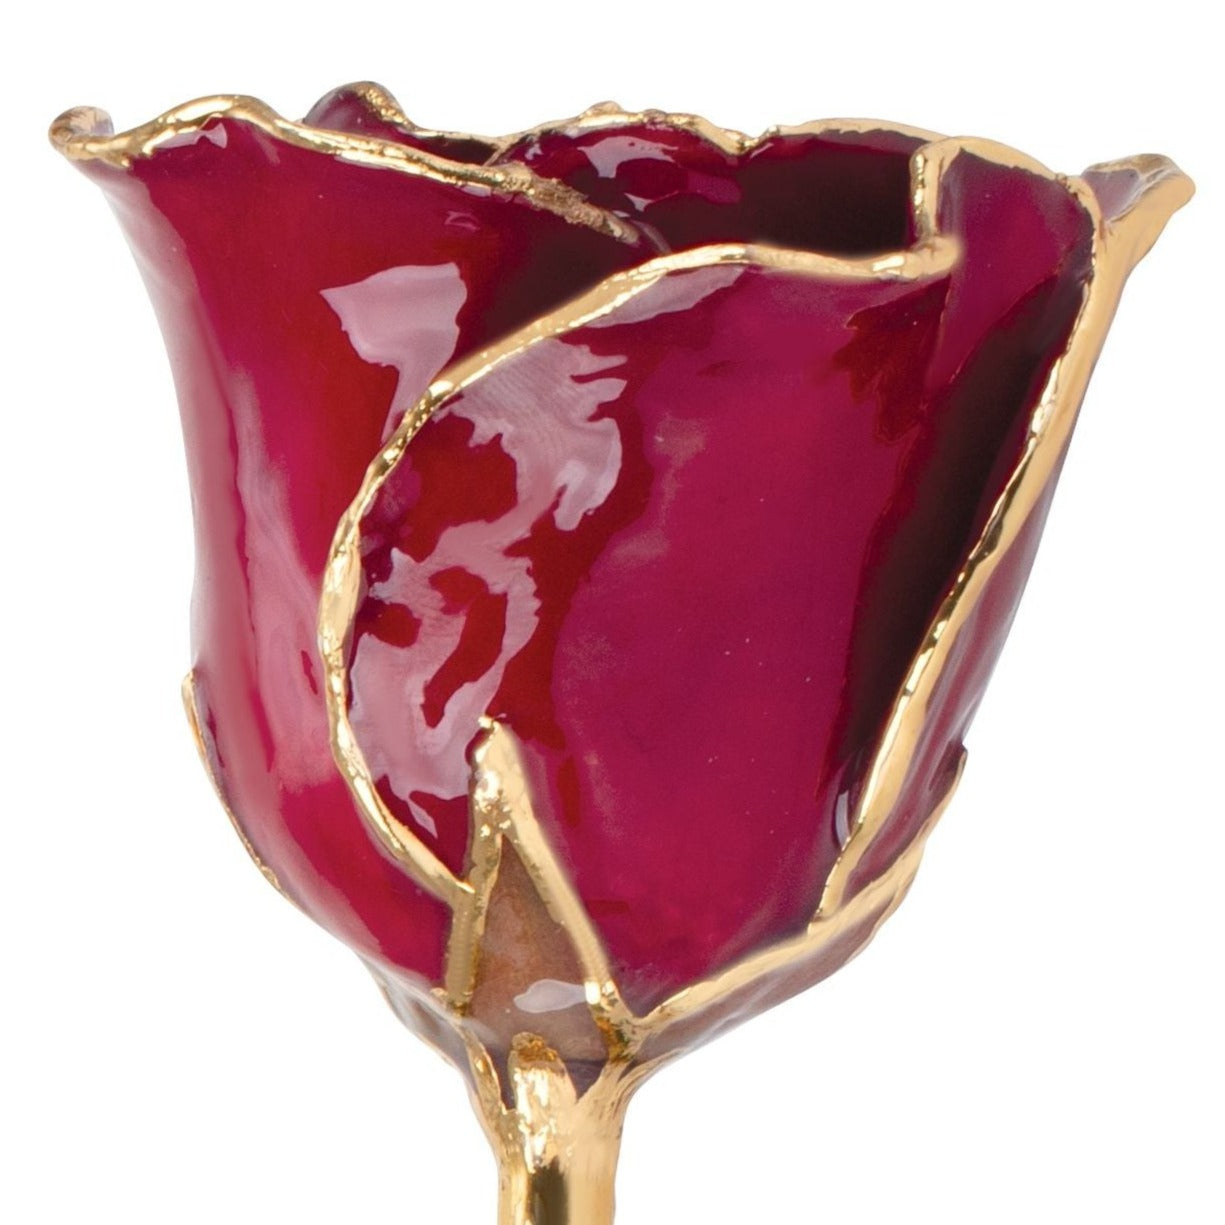 Preserved Garnet Colored Rose with 24K Gold Trim for Luxury Home Decor